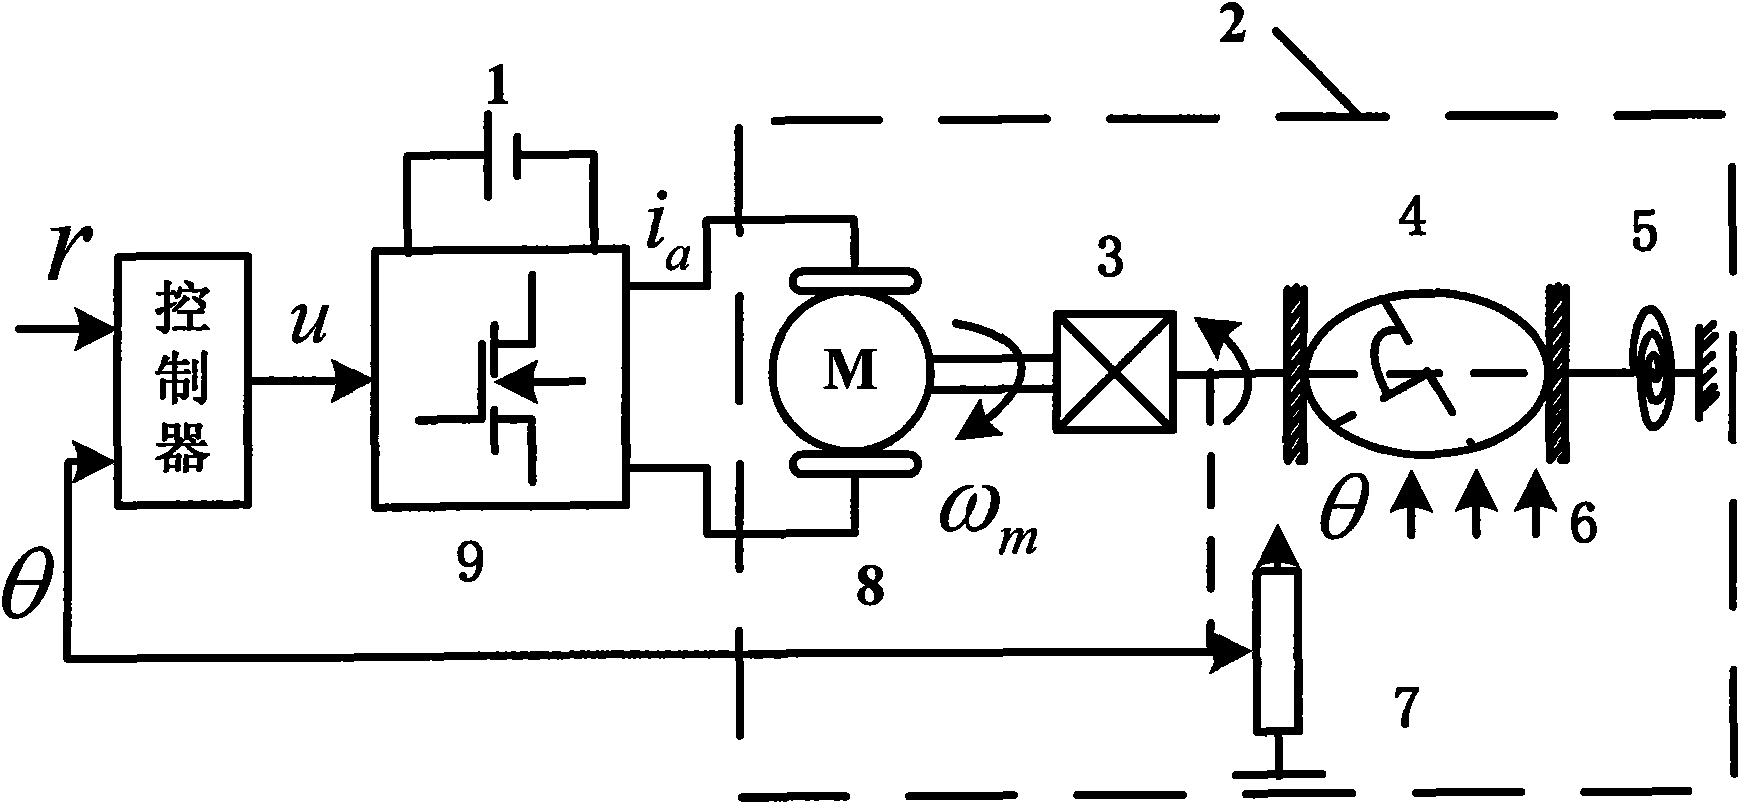 Self-learning inverse model control method of electronic throttle